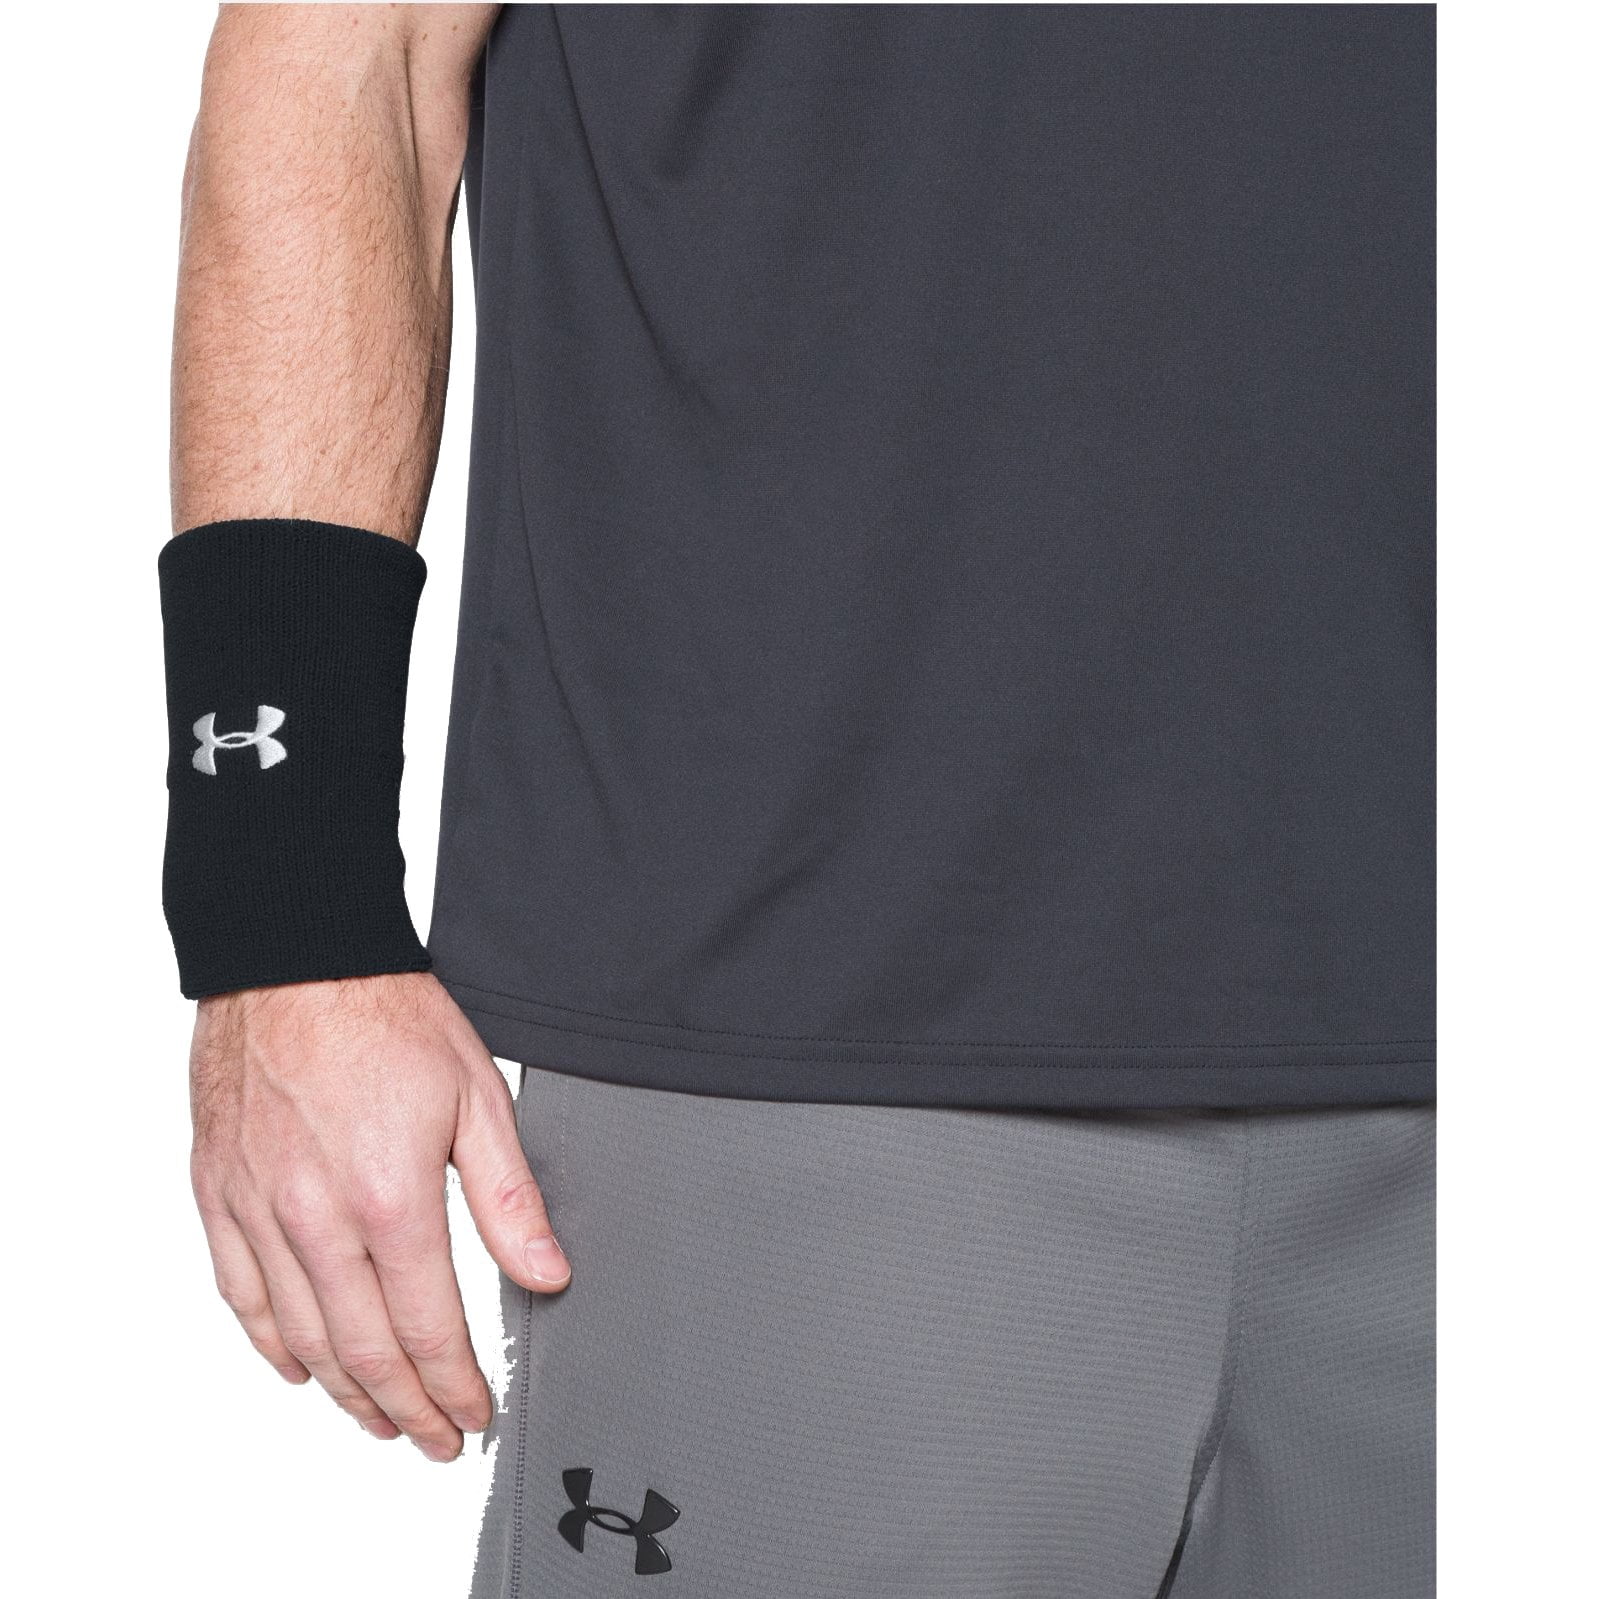 Details about   Under Armour UA 6" Performance Wristband 2-Pack Royal Blue and White 